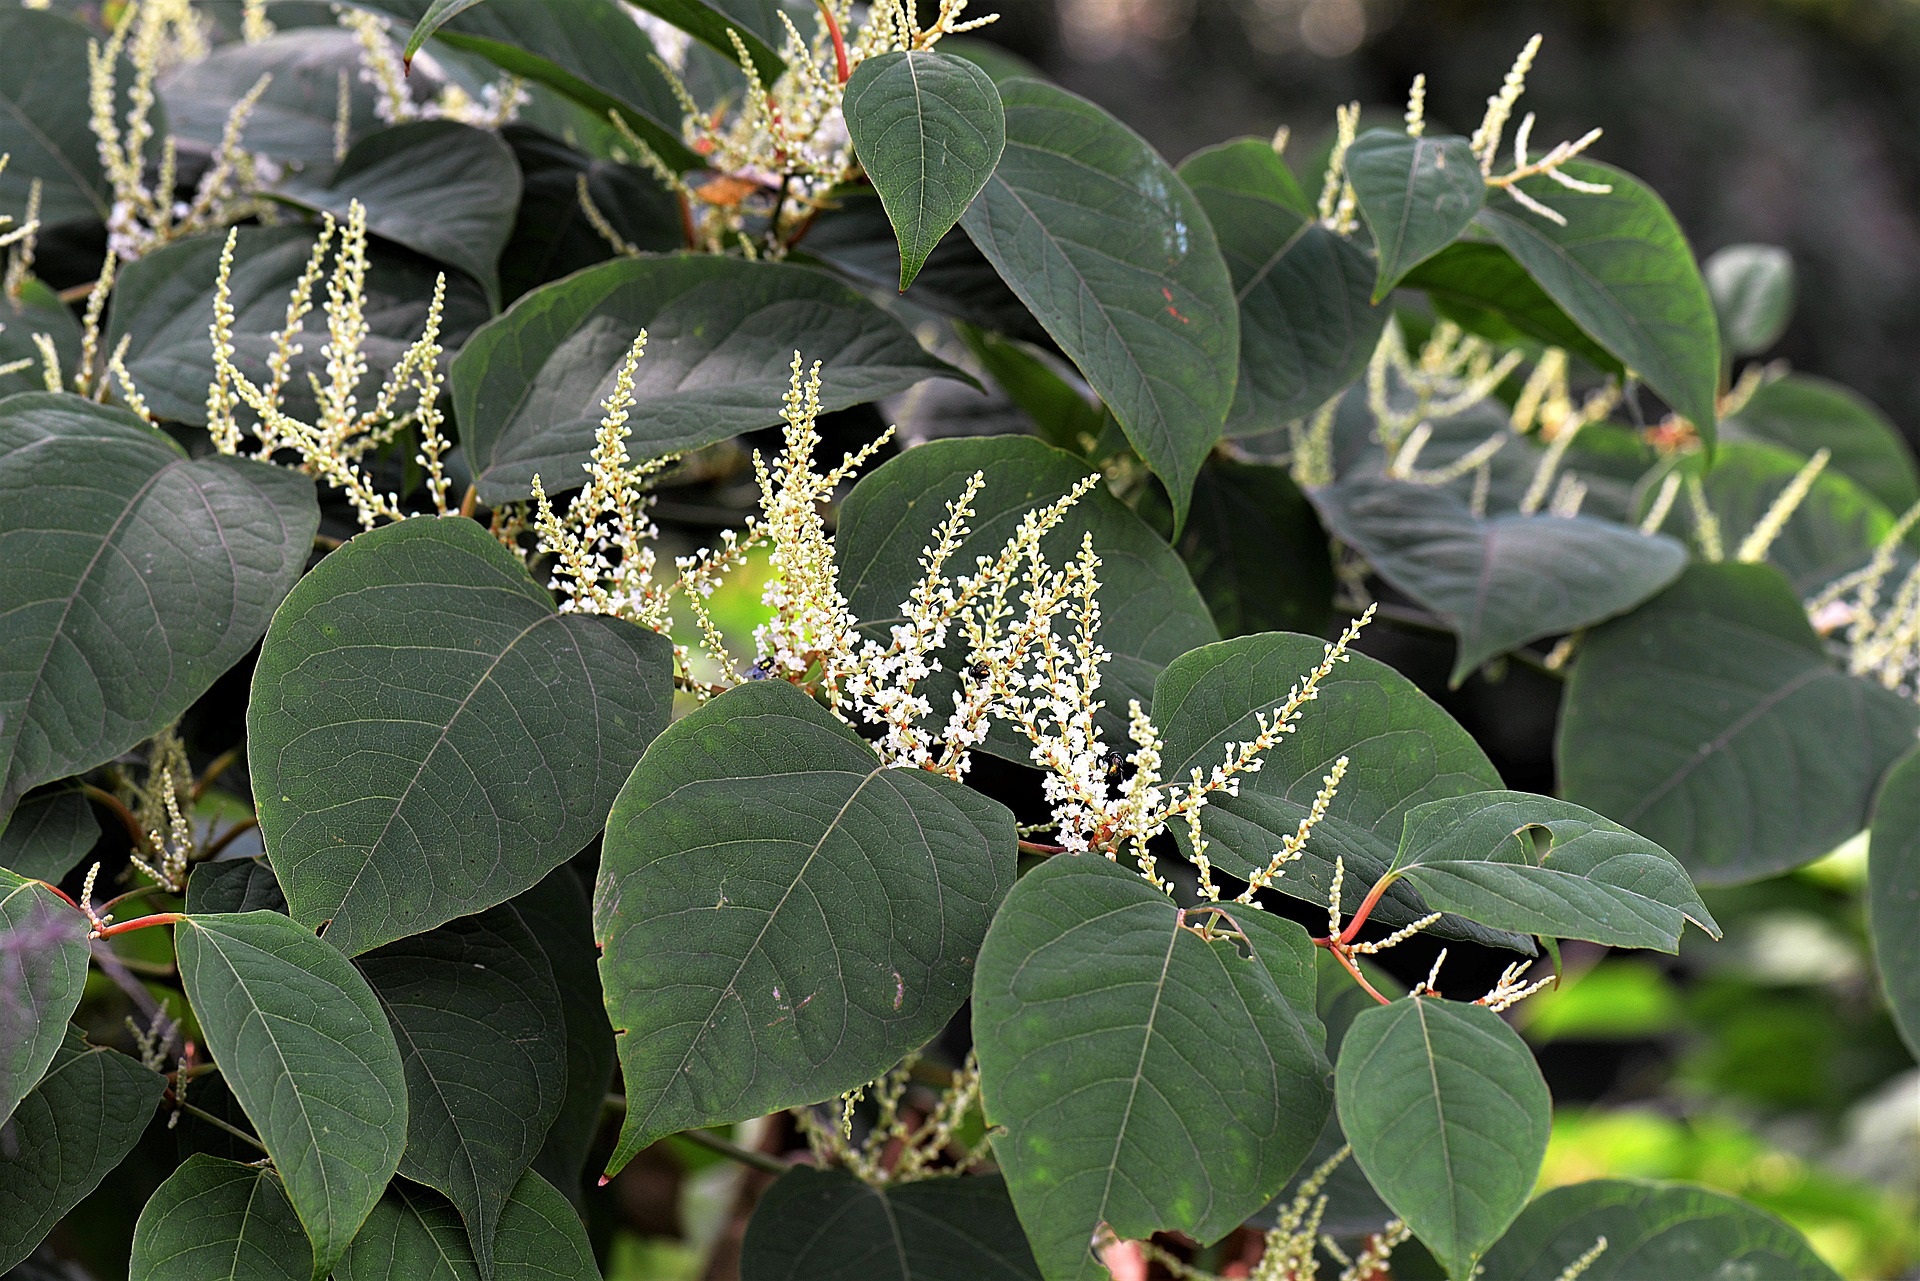 Japanese Knotweed: what are the implications for home owners?